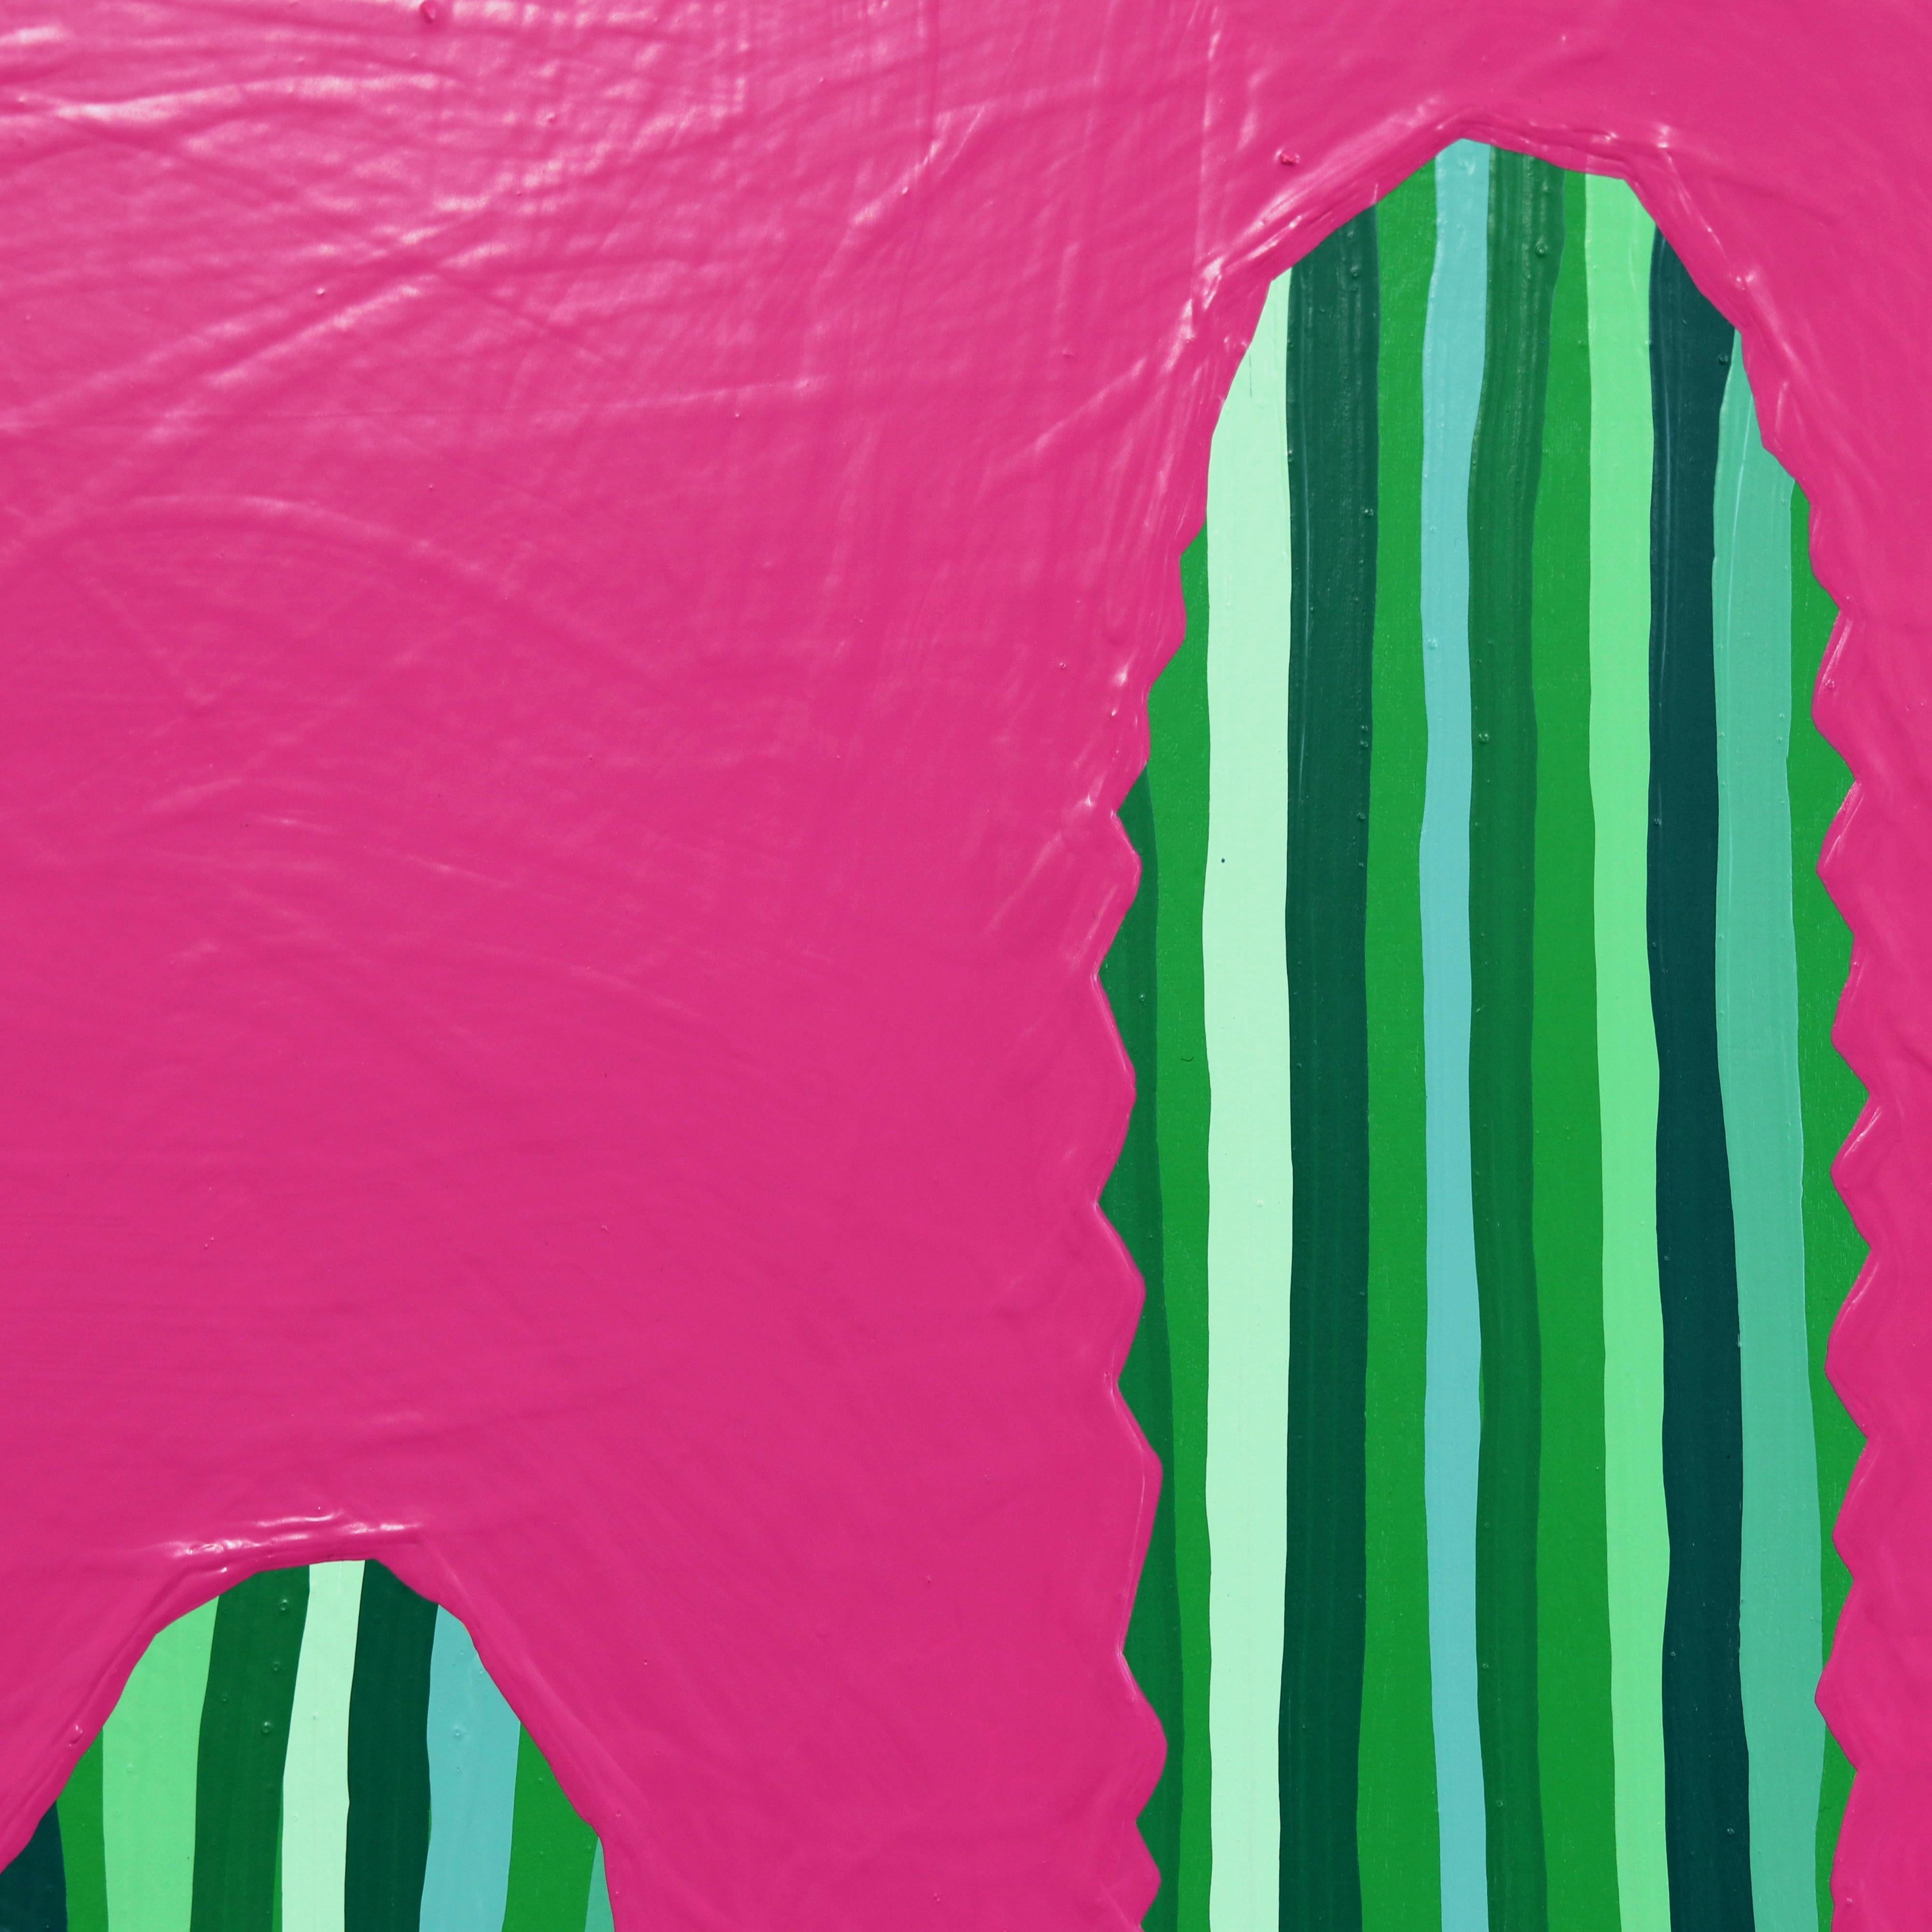 Rosa Picante - Vibrant Pink Green Southwest Inspired Pop Art Cactus Painting For Sale 3